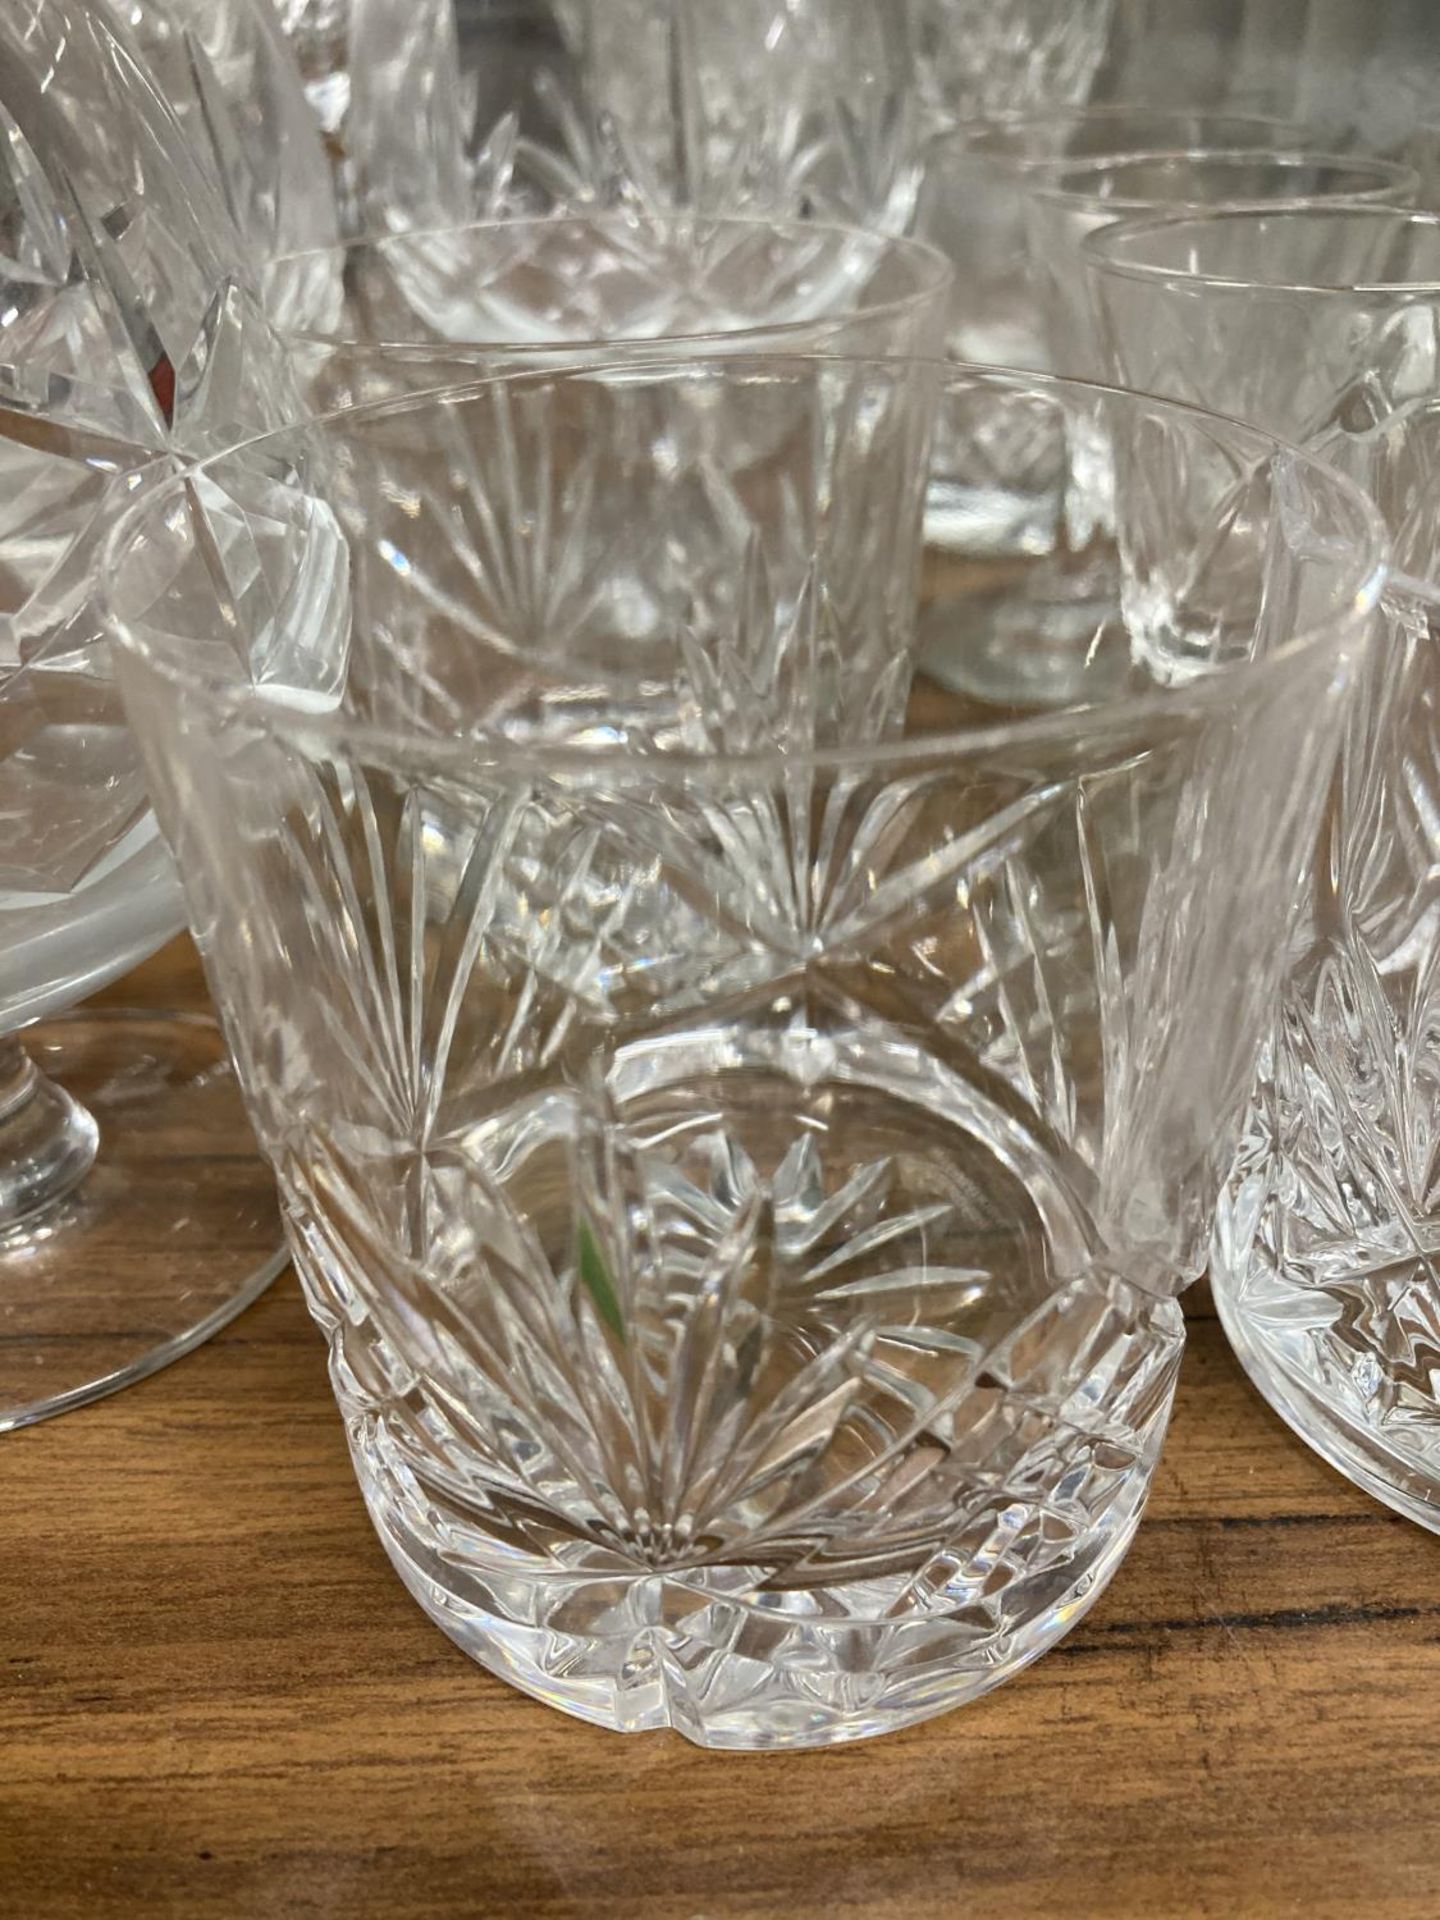 A LARGE QUANTITY OF GLASSES TO INCLUDE WINE, CHAMPAGNE FLUTES, SHERRY,BRANDY, ETC - Image 5 of 5